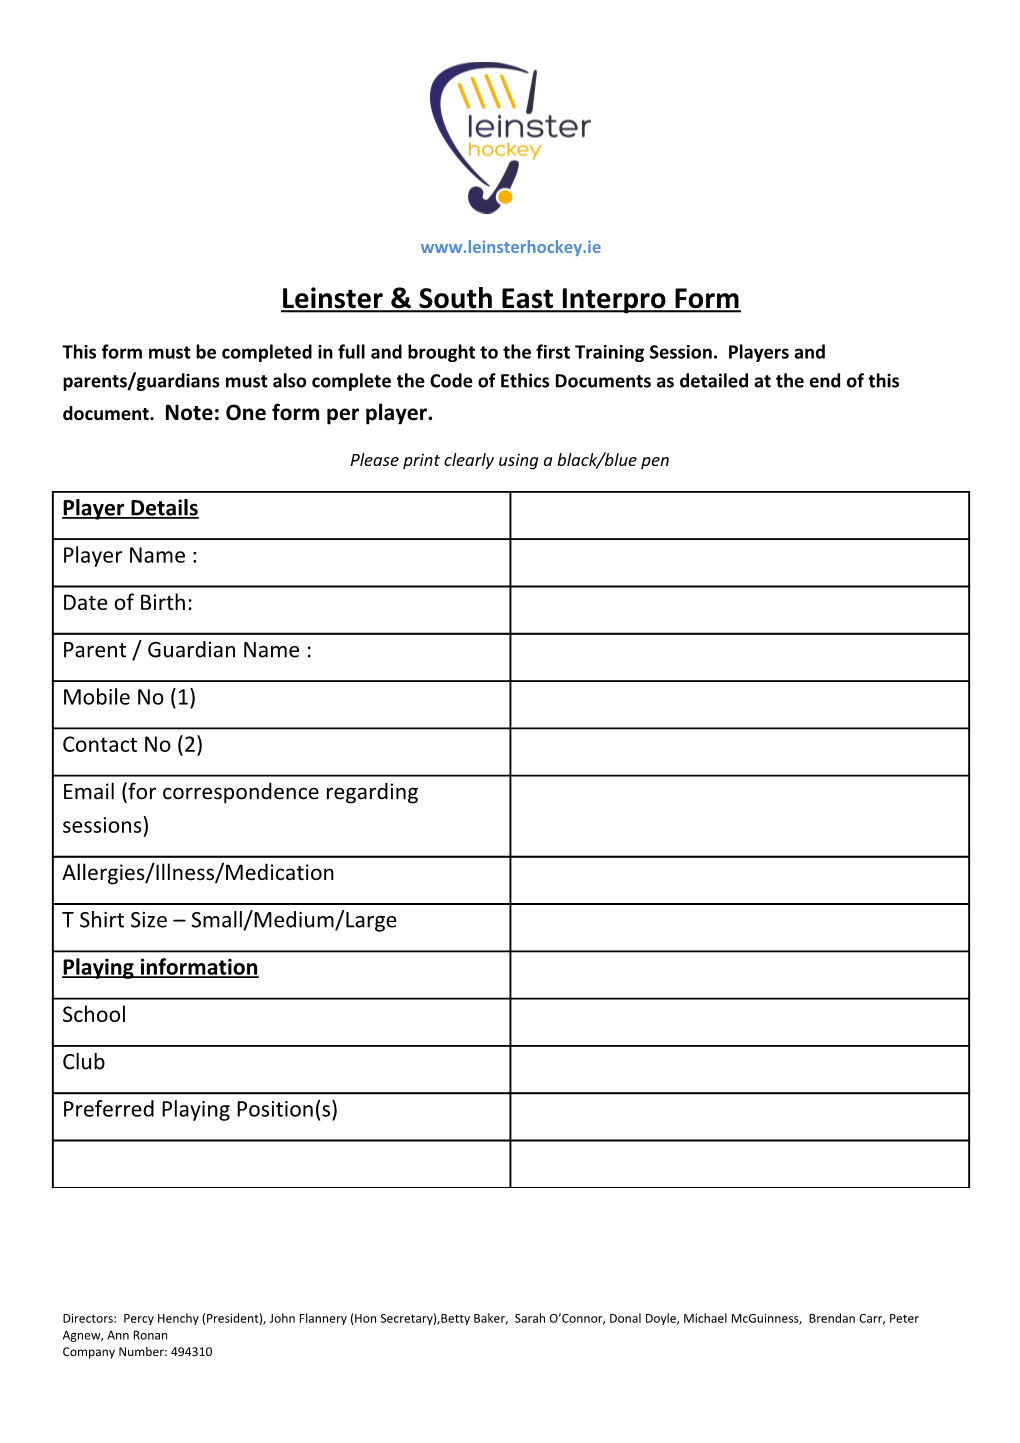 Leinster & South East Interpro Form